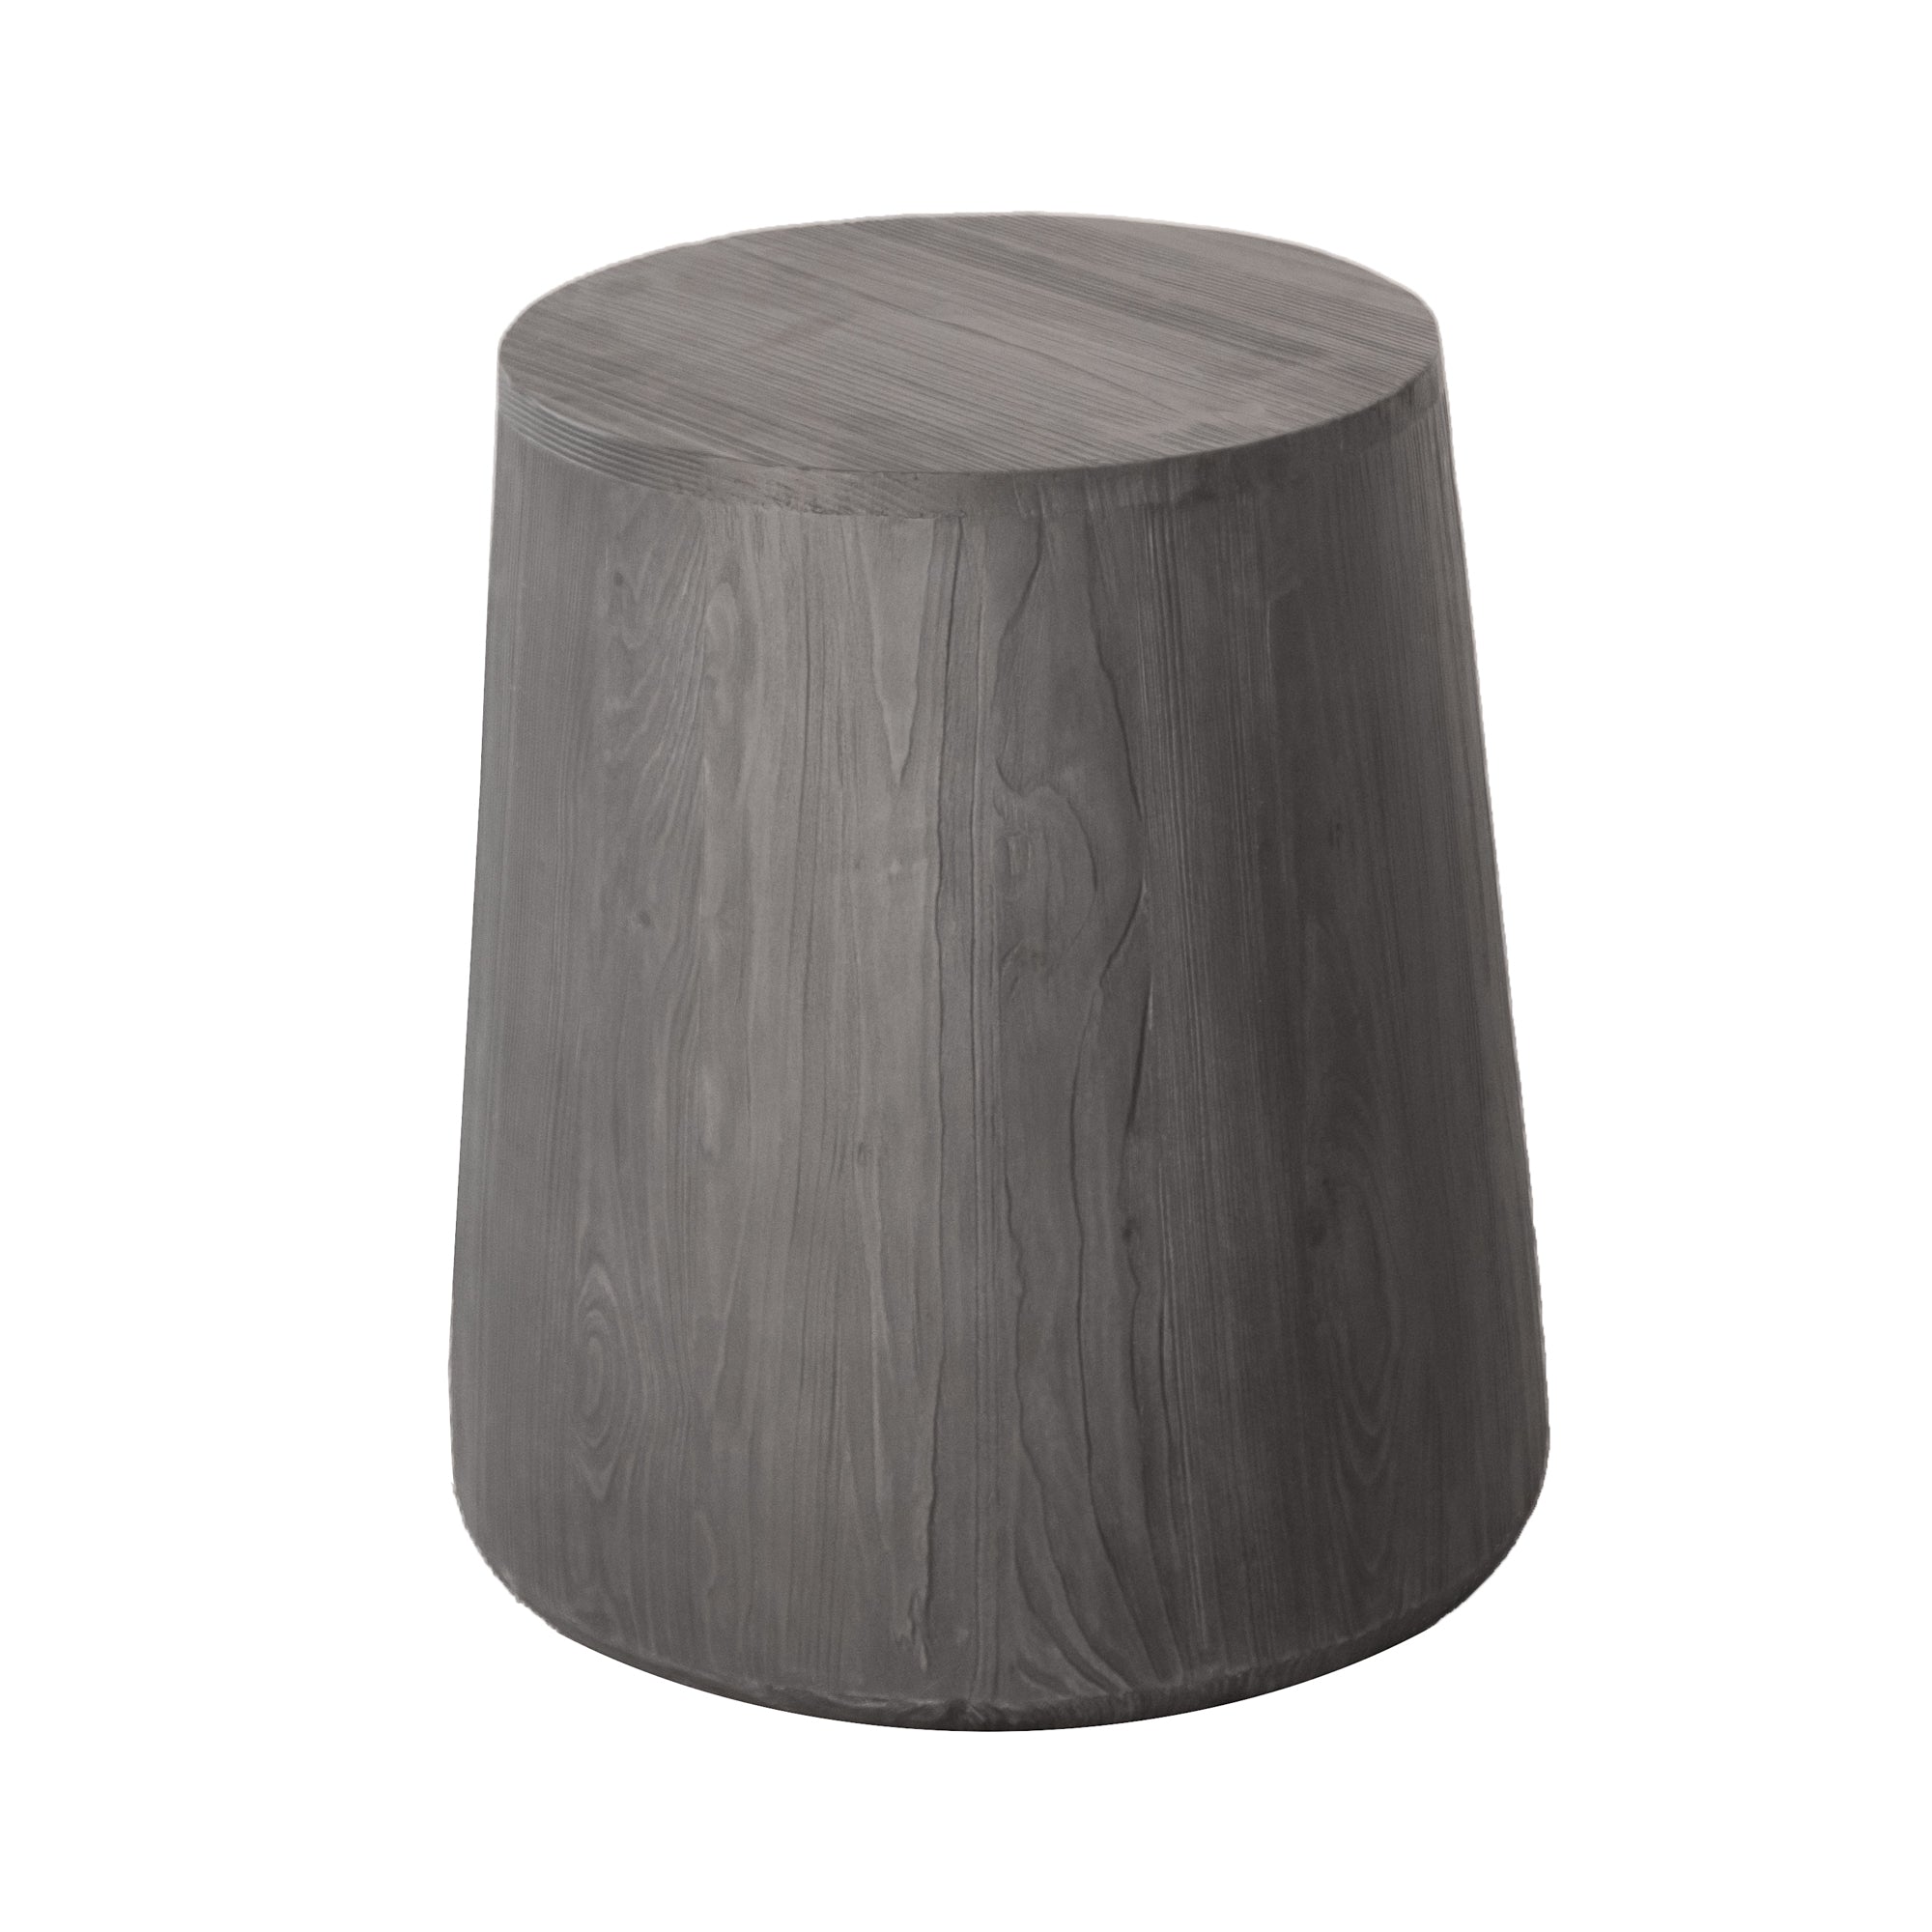 18" Ebony Solid Wood Round End Table